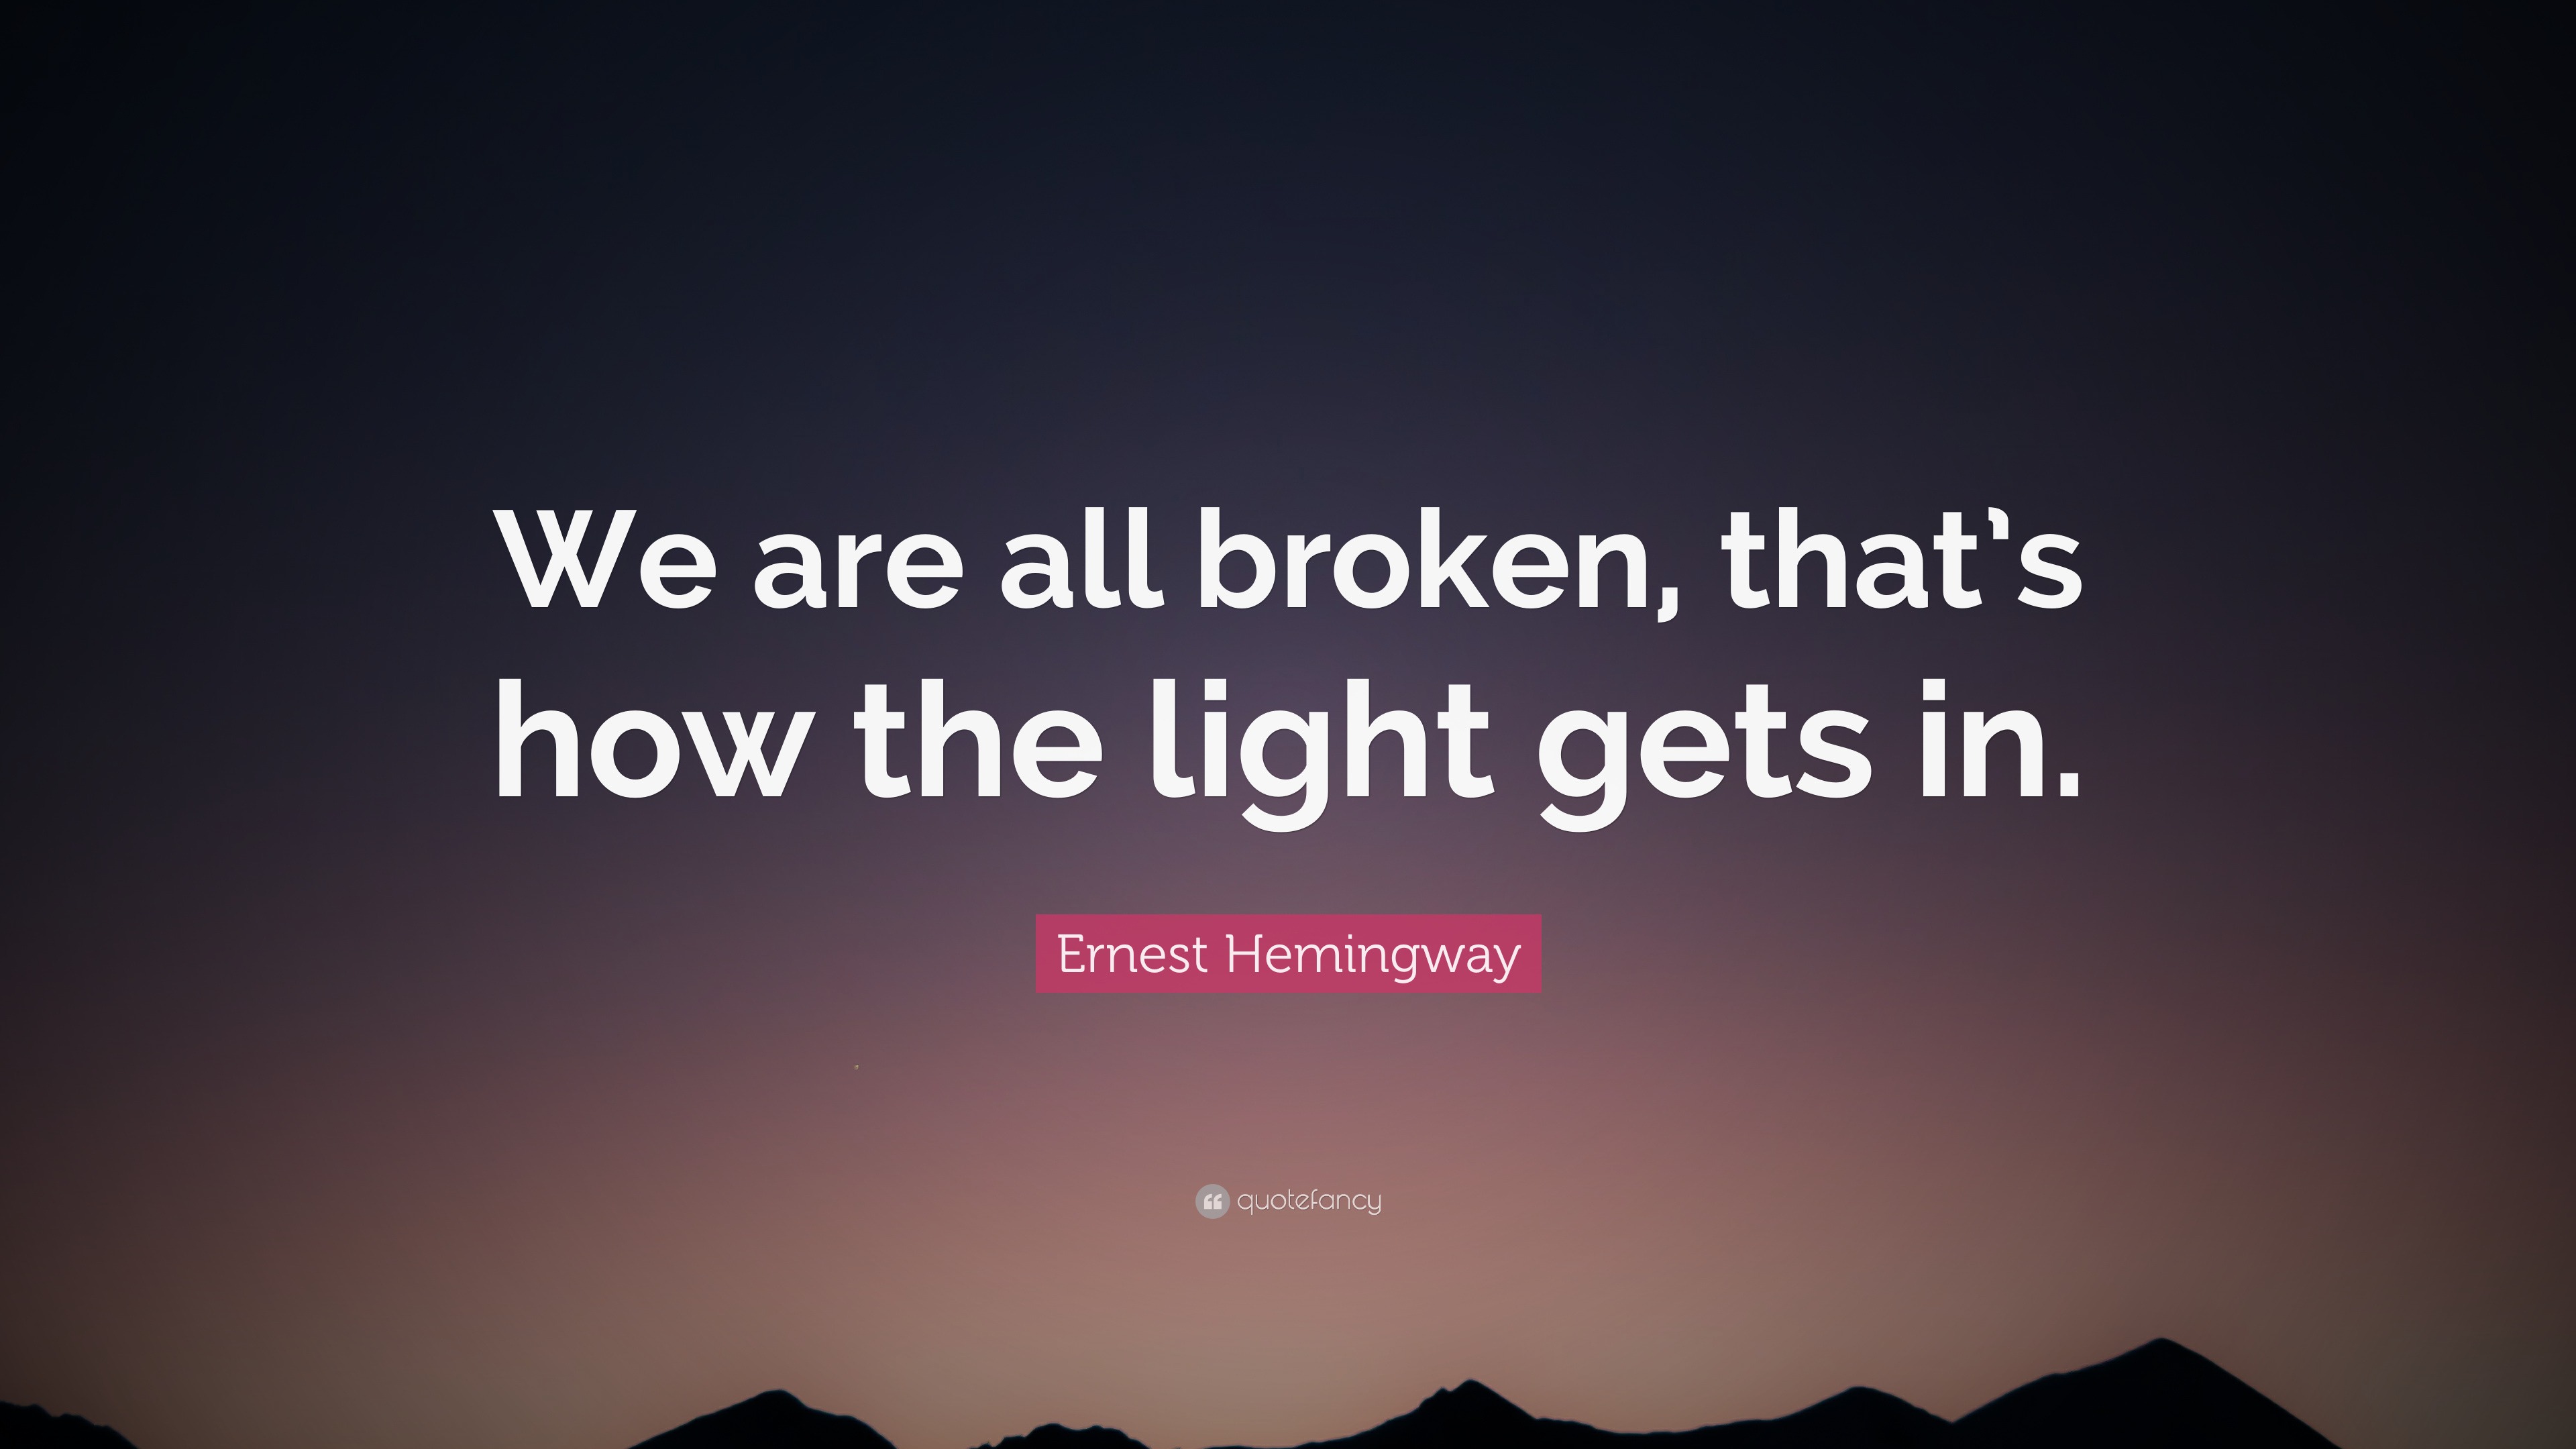 Ernest Hemingway Quote: “We are all broken, that’s how the light gets